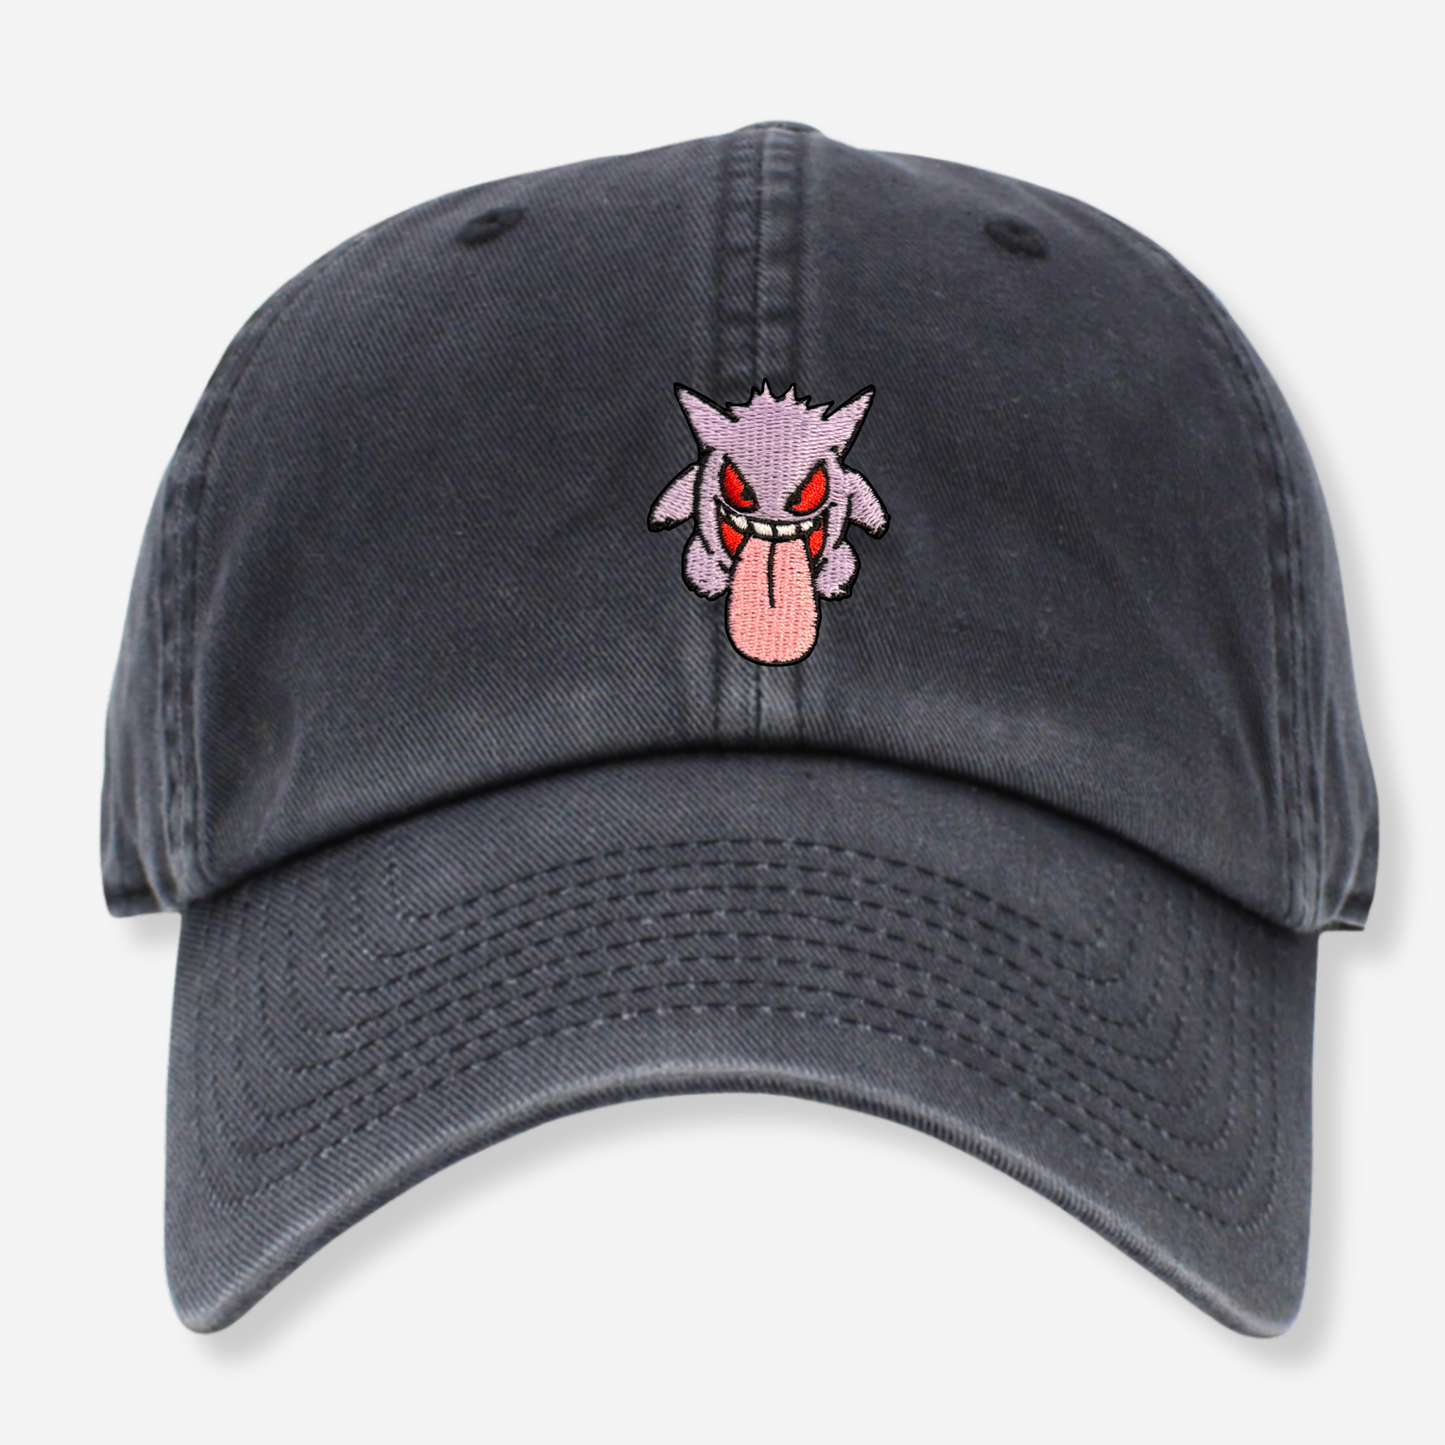 Gengar Embroidered Hat - GLOW in the Dark Features